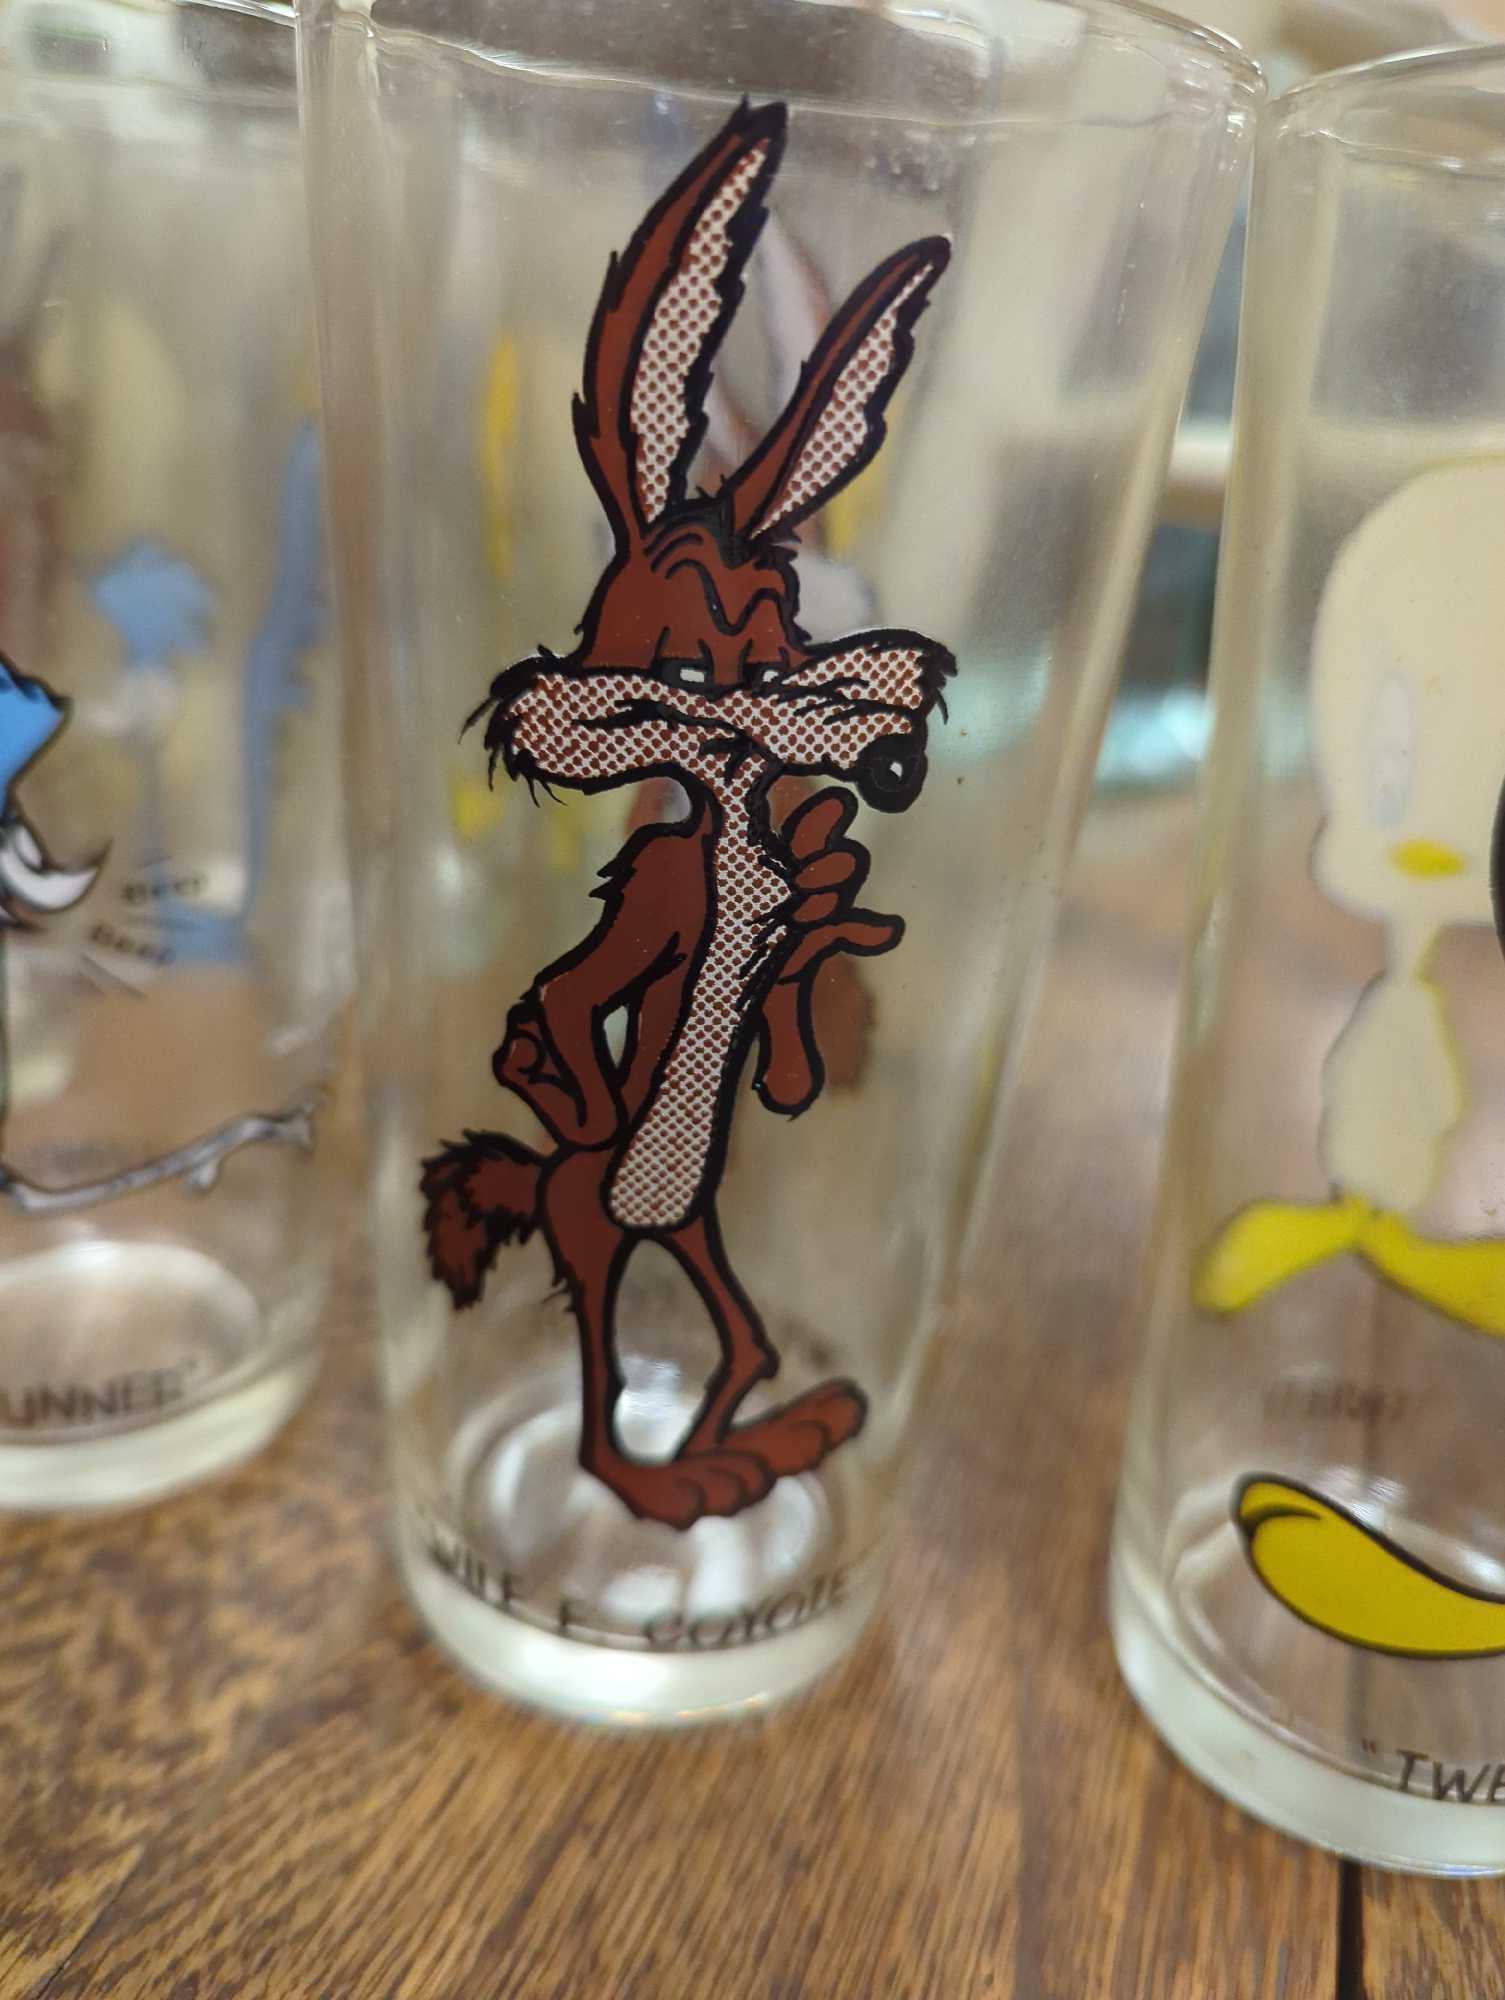 Lot of 18 1973 Warmers Bros. Pepsi Collectable Glass Drinking Cups to Include, Wile E Coyote,